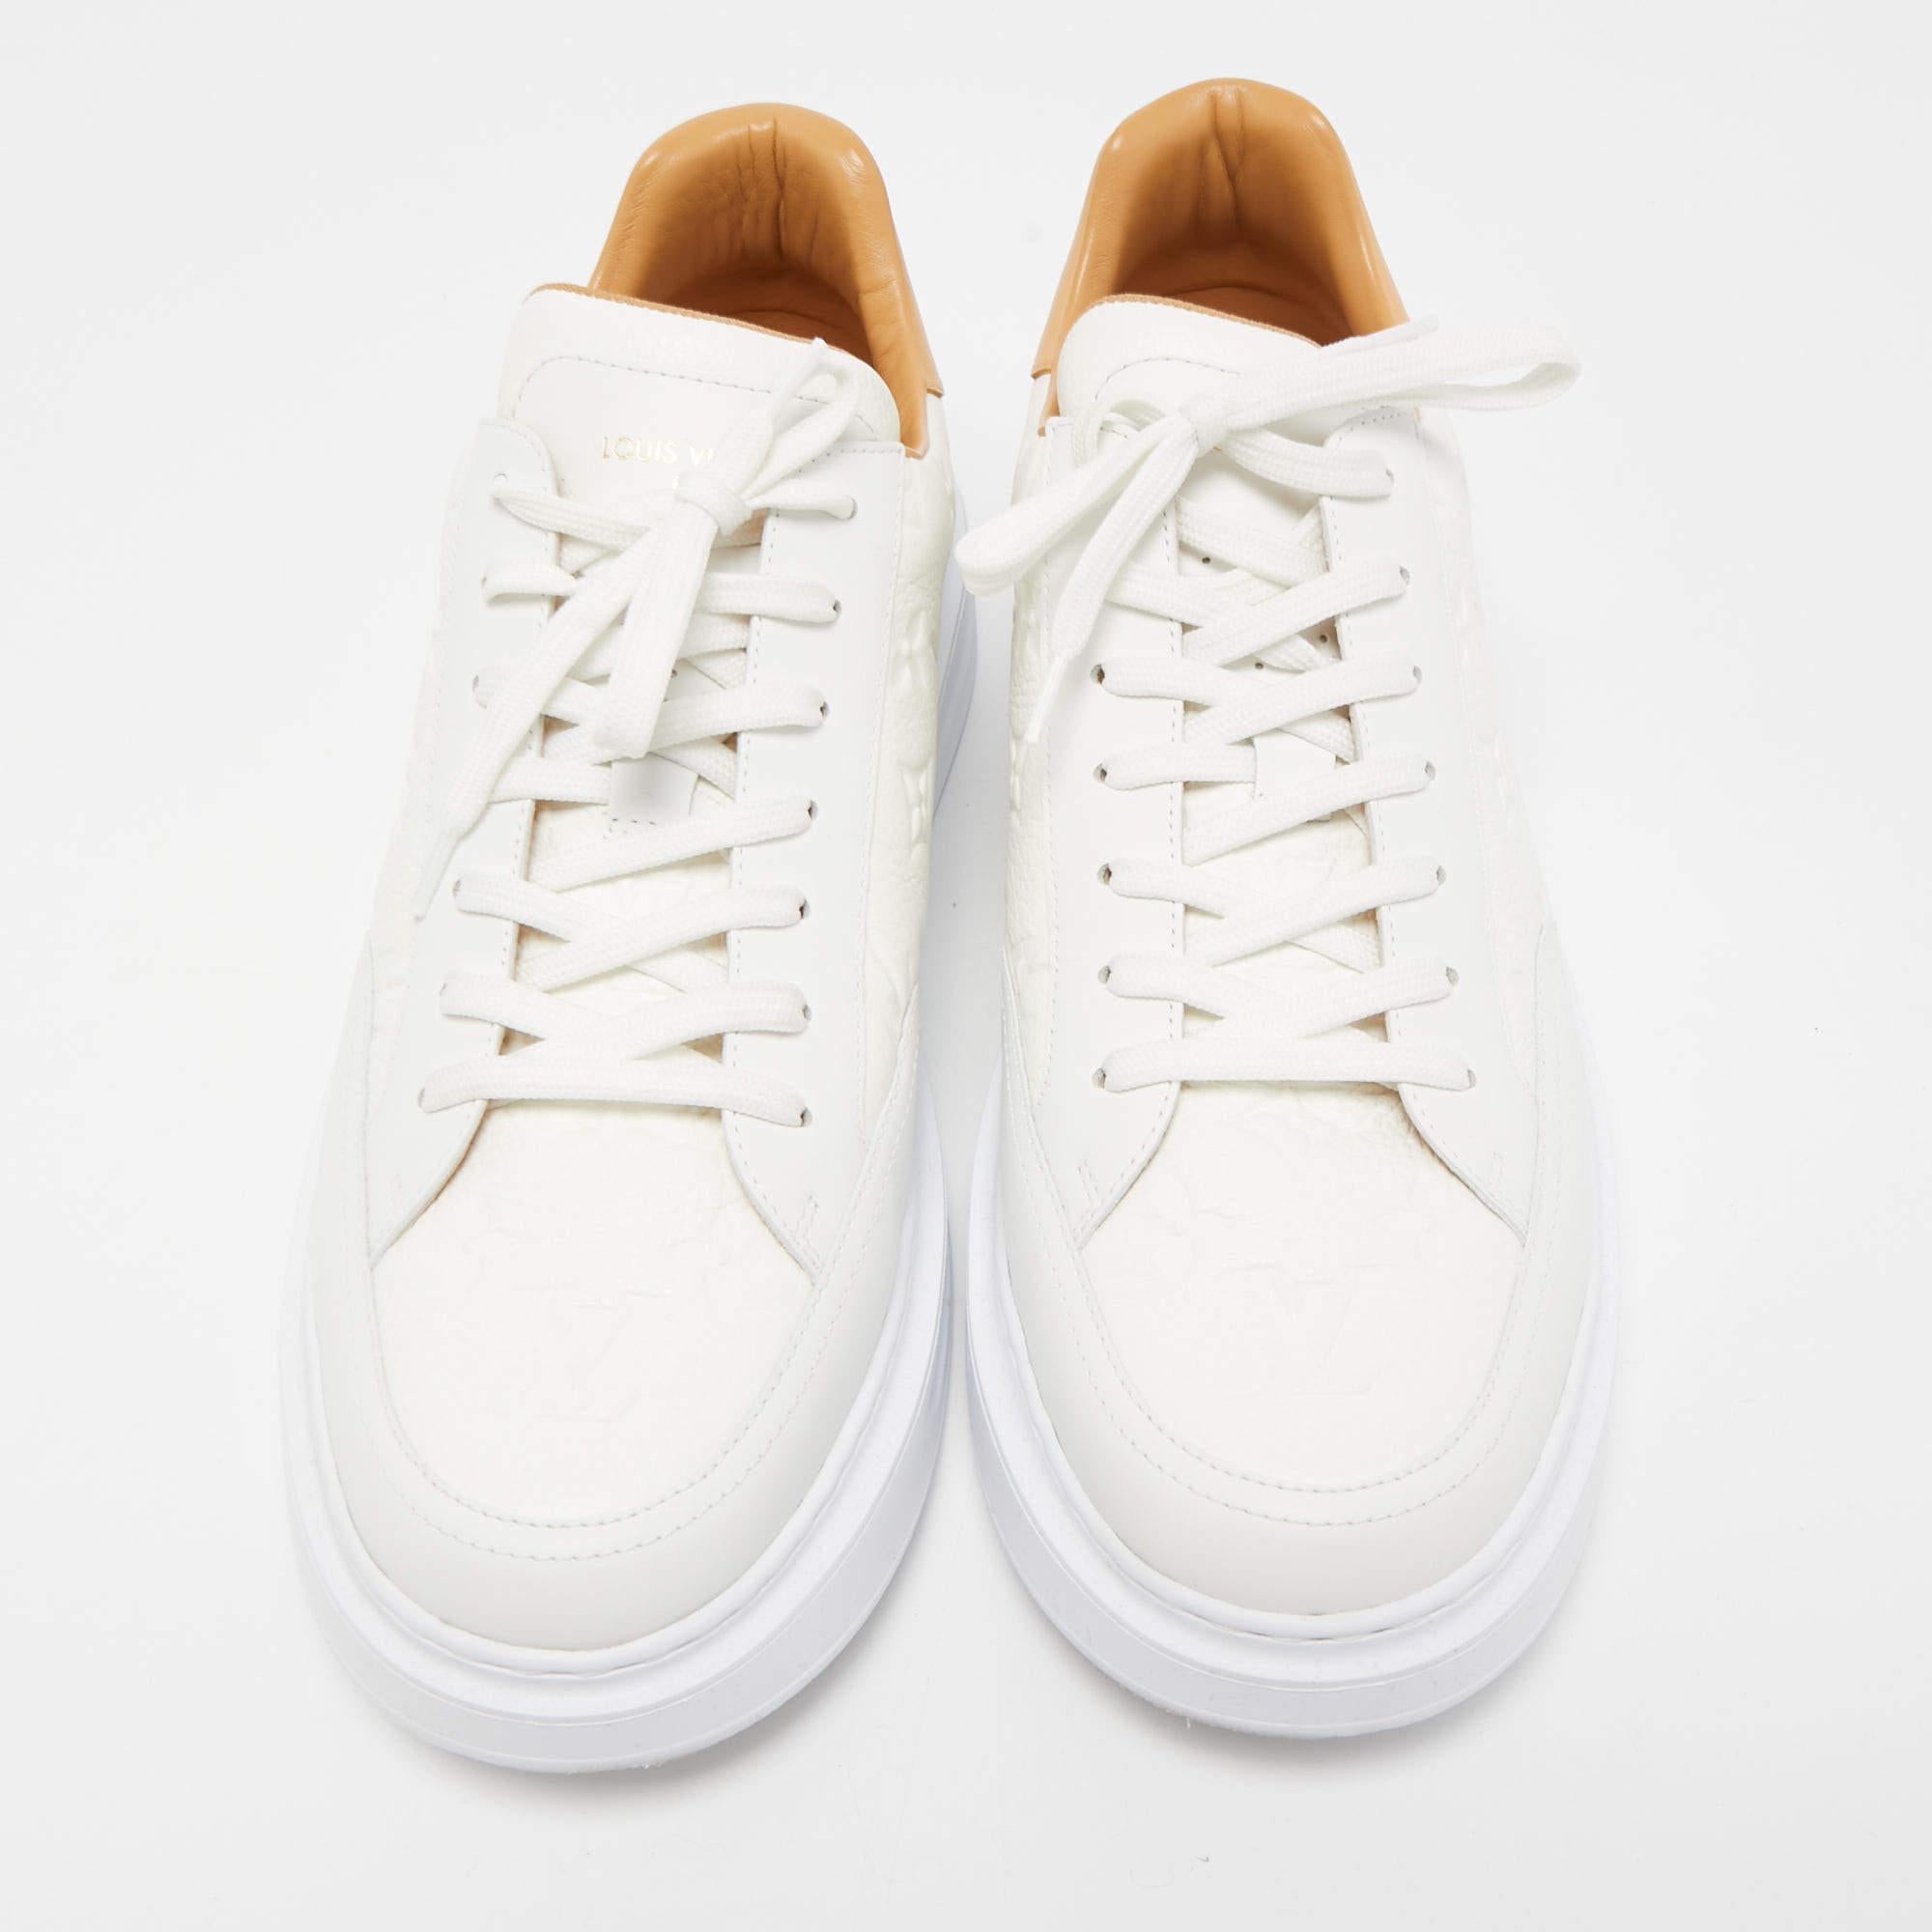 Packed with style and comfort, these Louis Vuitton Beverly Hills white sneakers are gentle on the feet so that you can glide through the day. They have a sleek upper with lace closure, and they're set on durable rubber soles.

